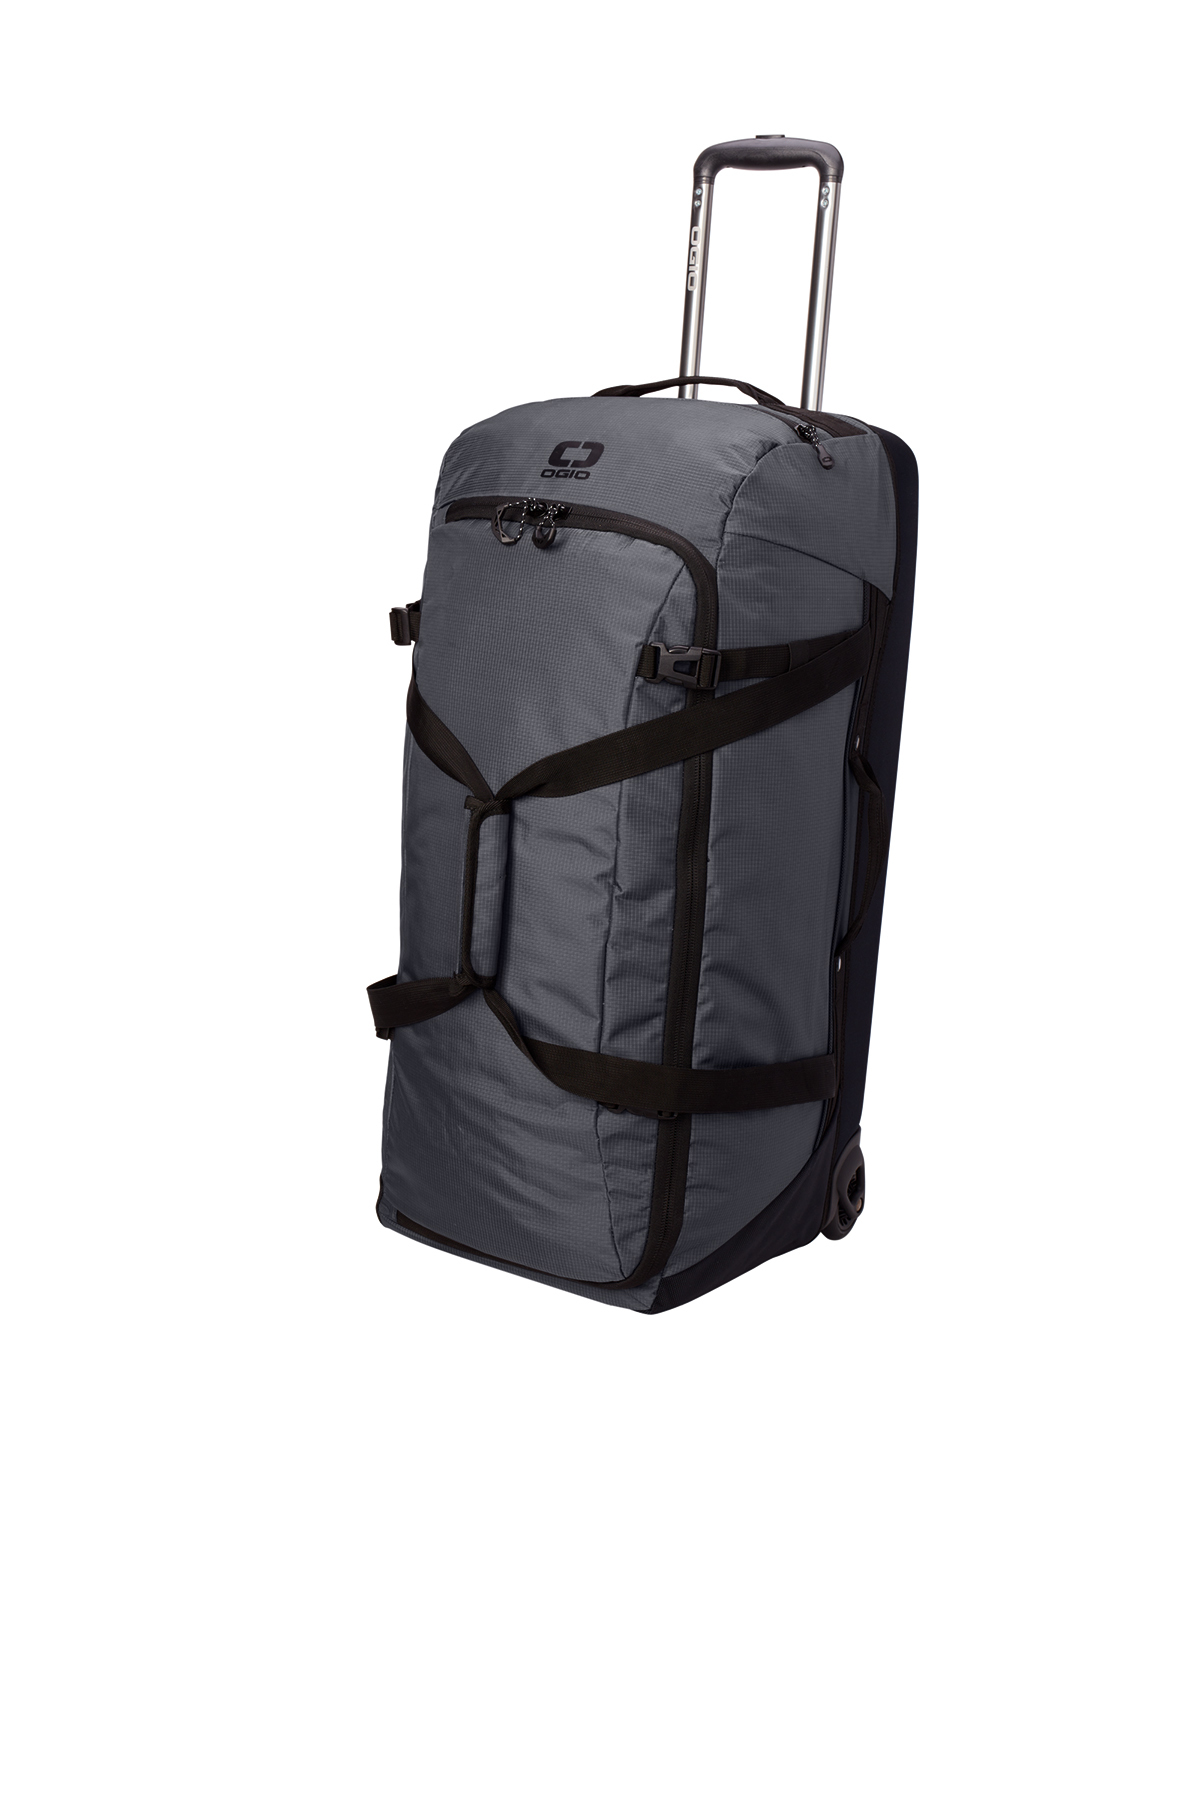 OGIO Passage Wheeled Checked Duffel | Product | SanMar